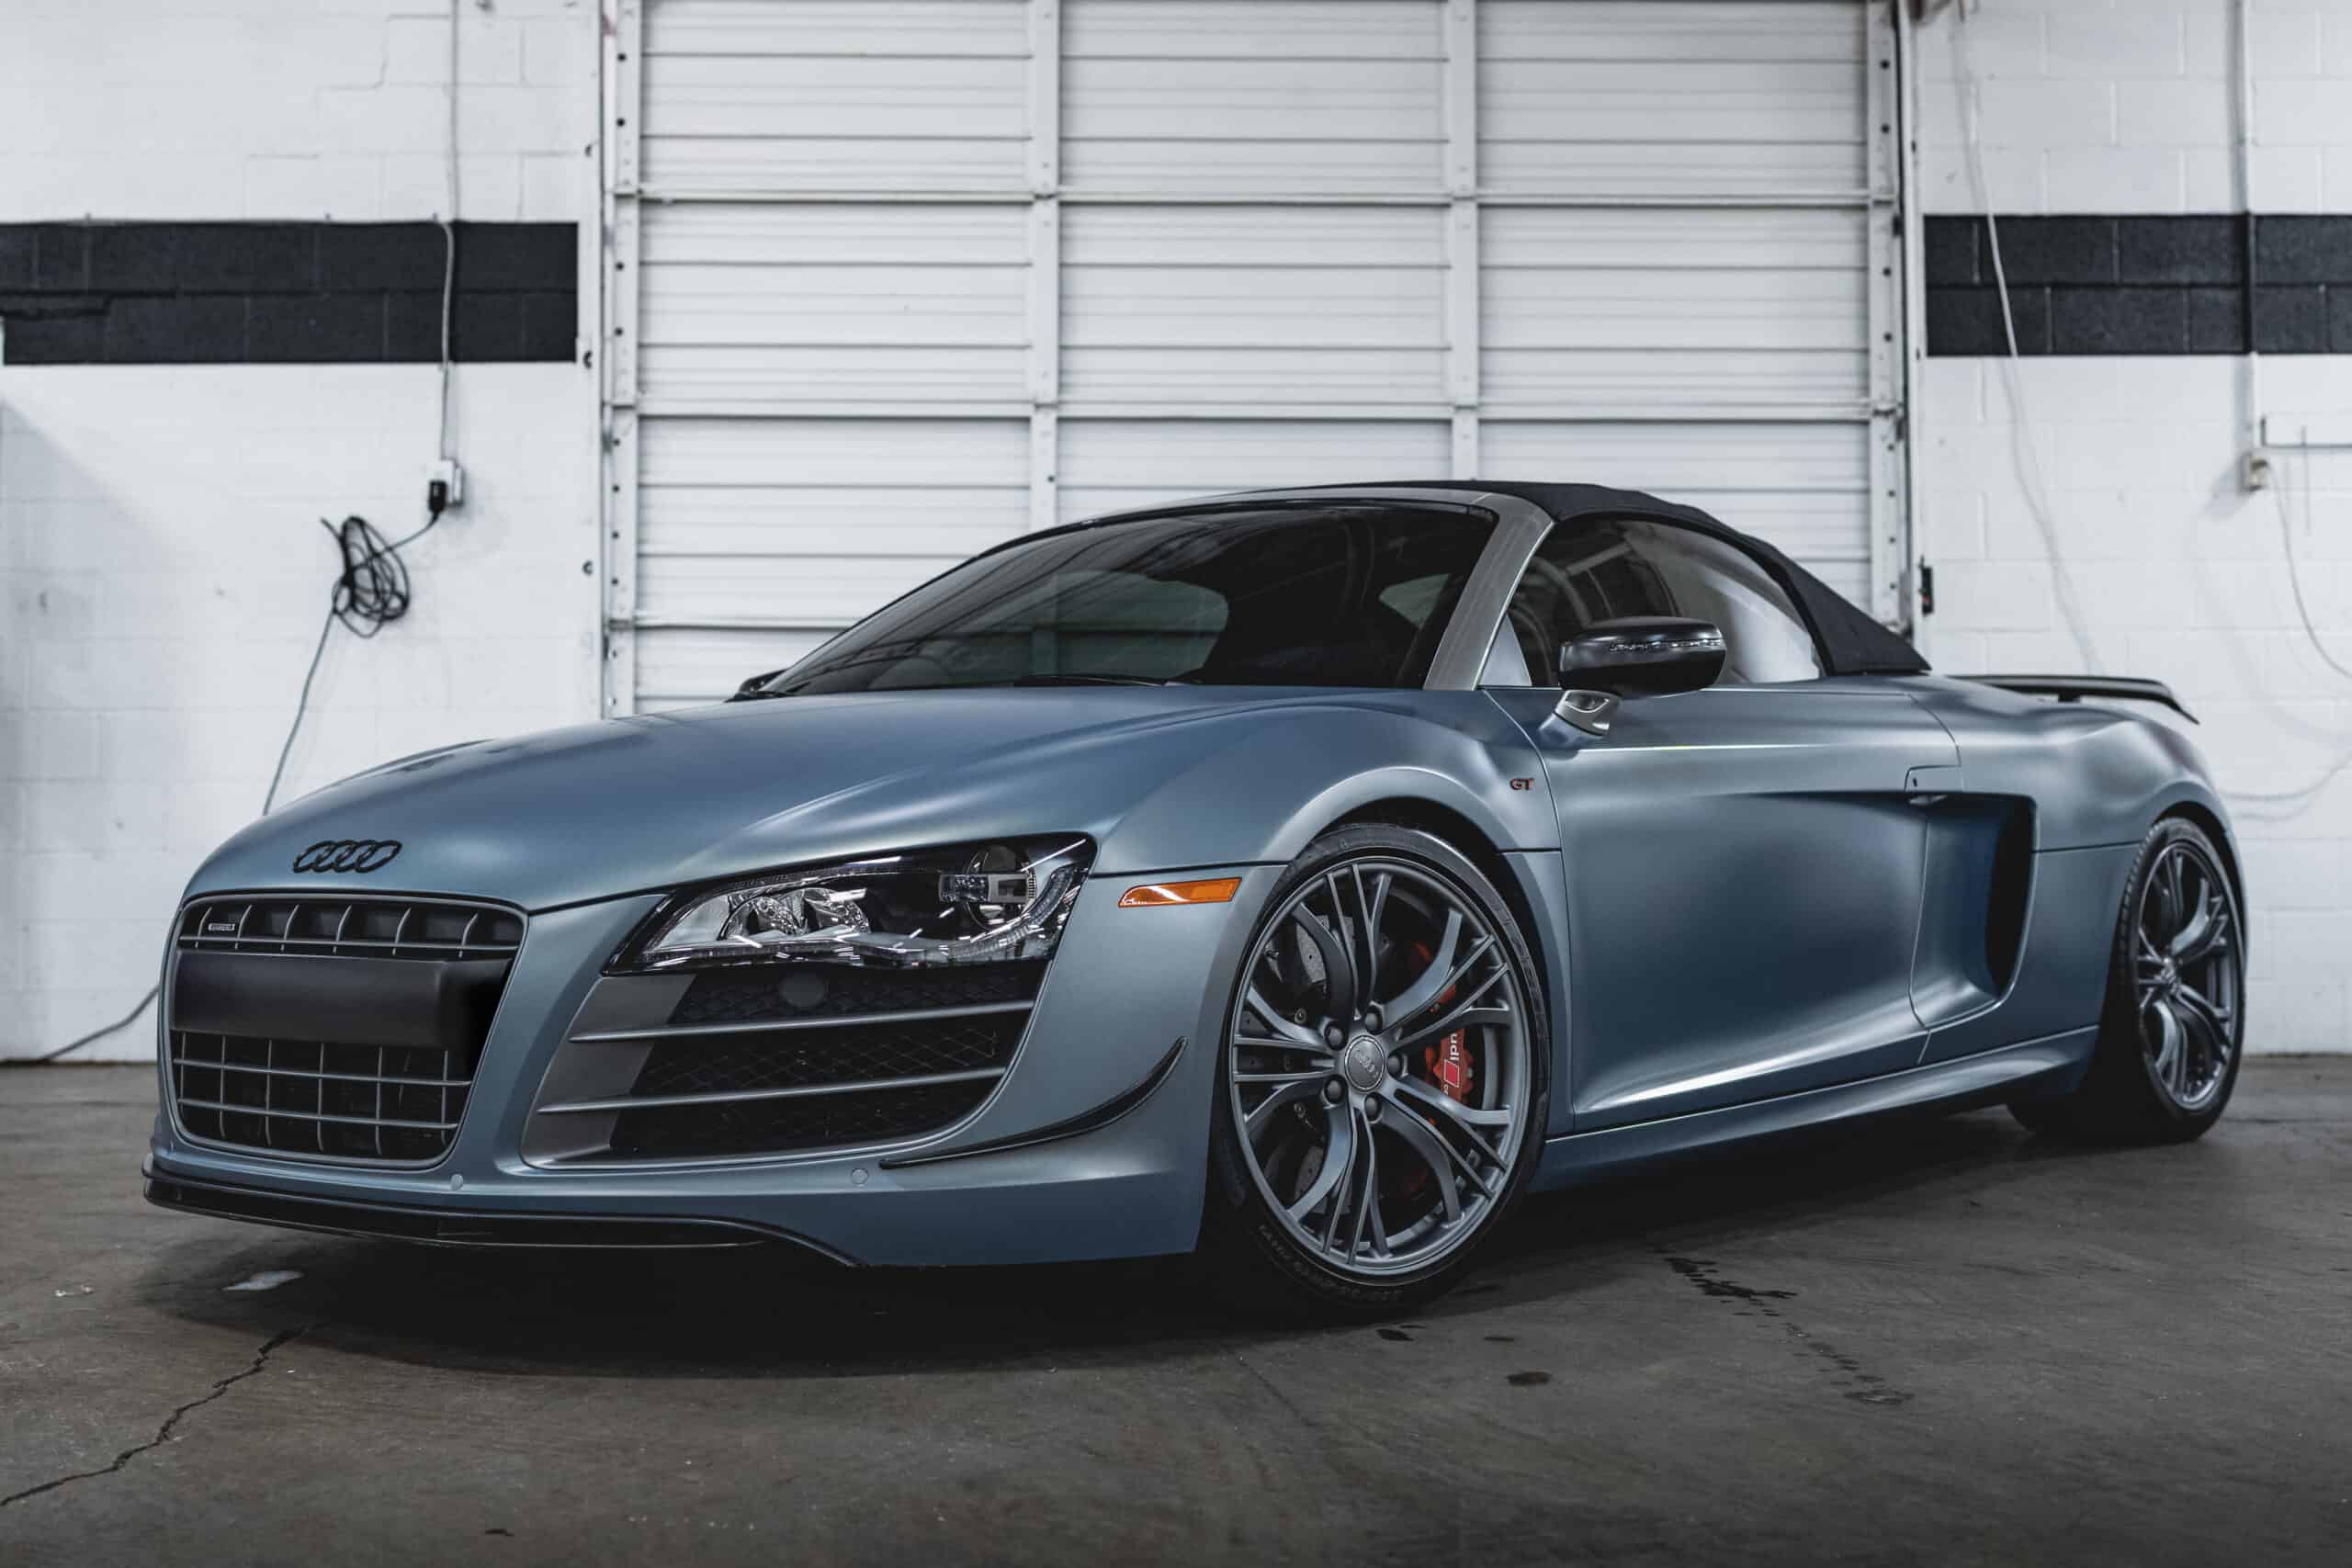 2012 Audi R8 GT Spyder protected XPEL ultimate plus ppf